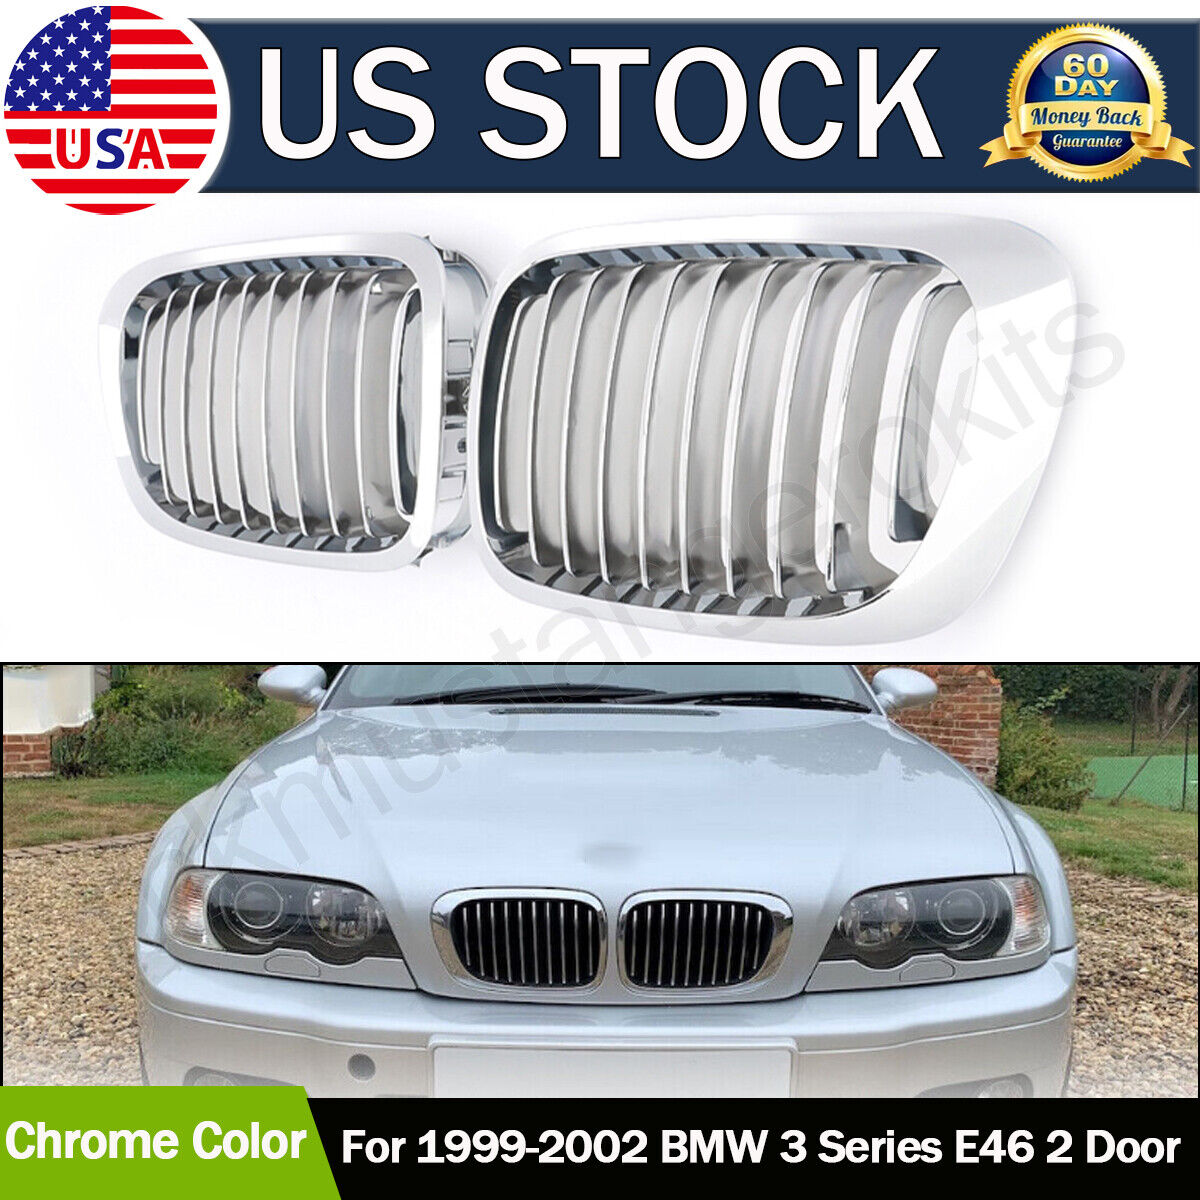 Chrome Front Kidney Grille For 99-02 BMW E46 3 Series 325Ci 328i 330Ci Coupe/2Dr